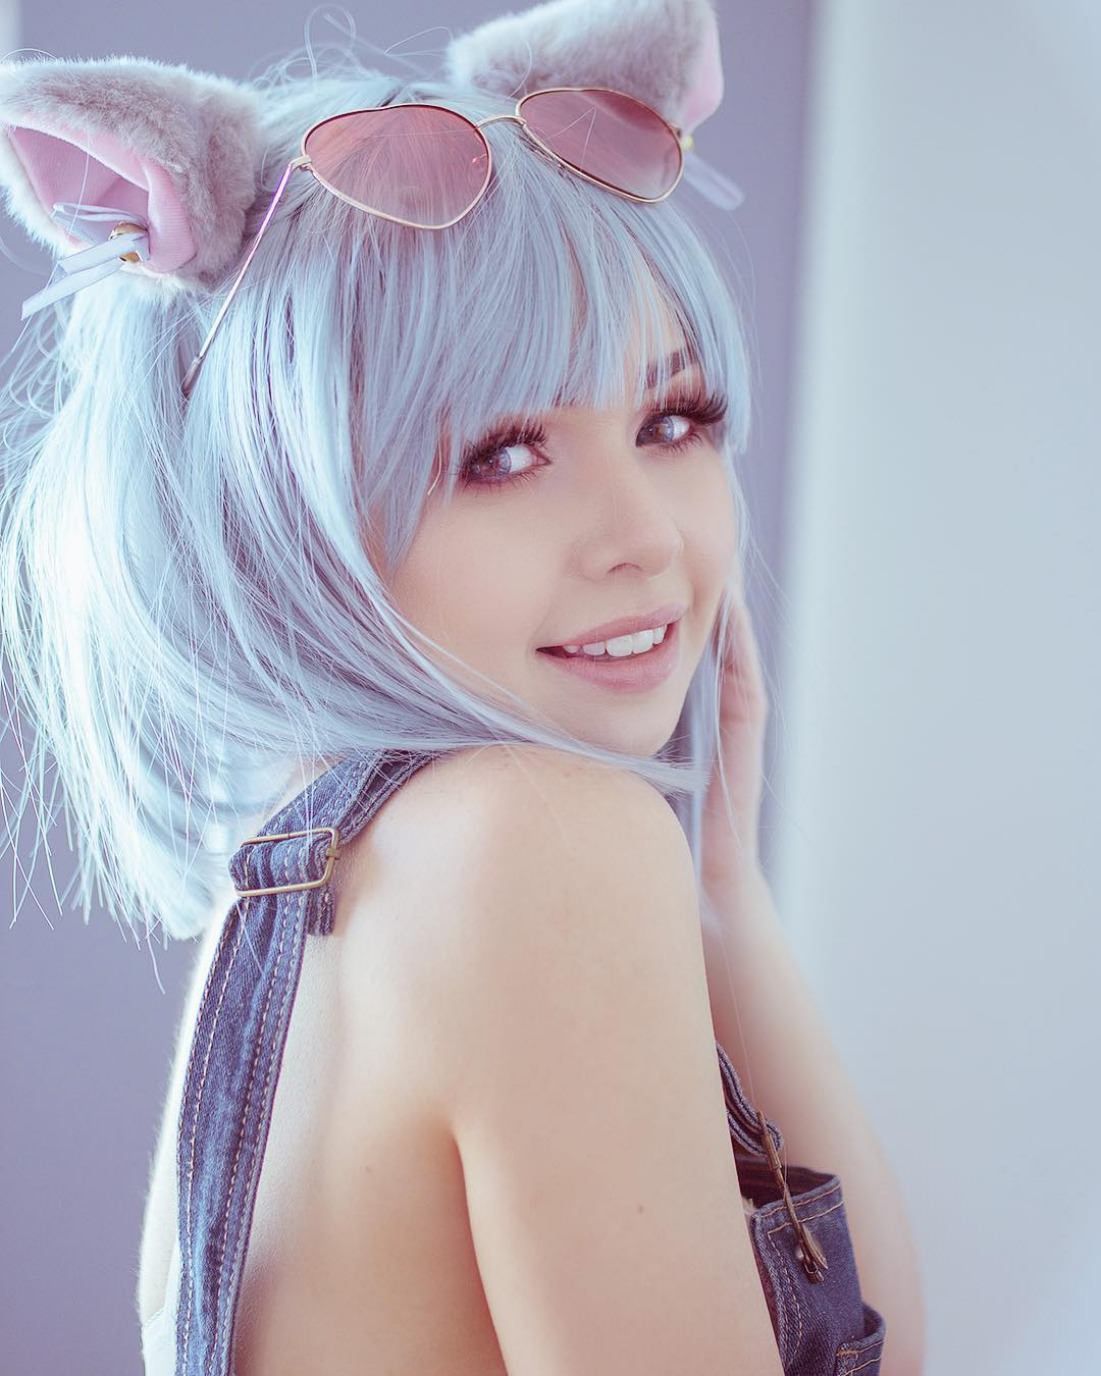 Cosplay by Amy Thunderbolt